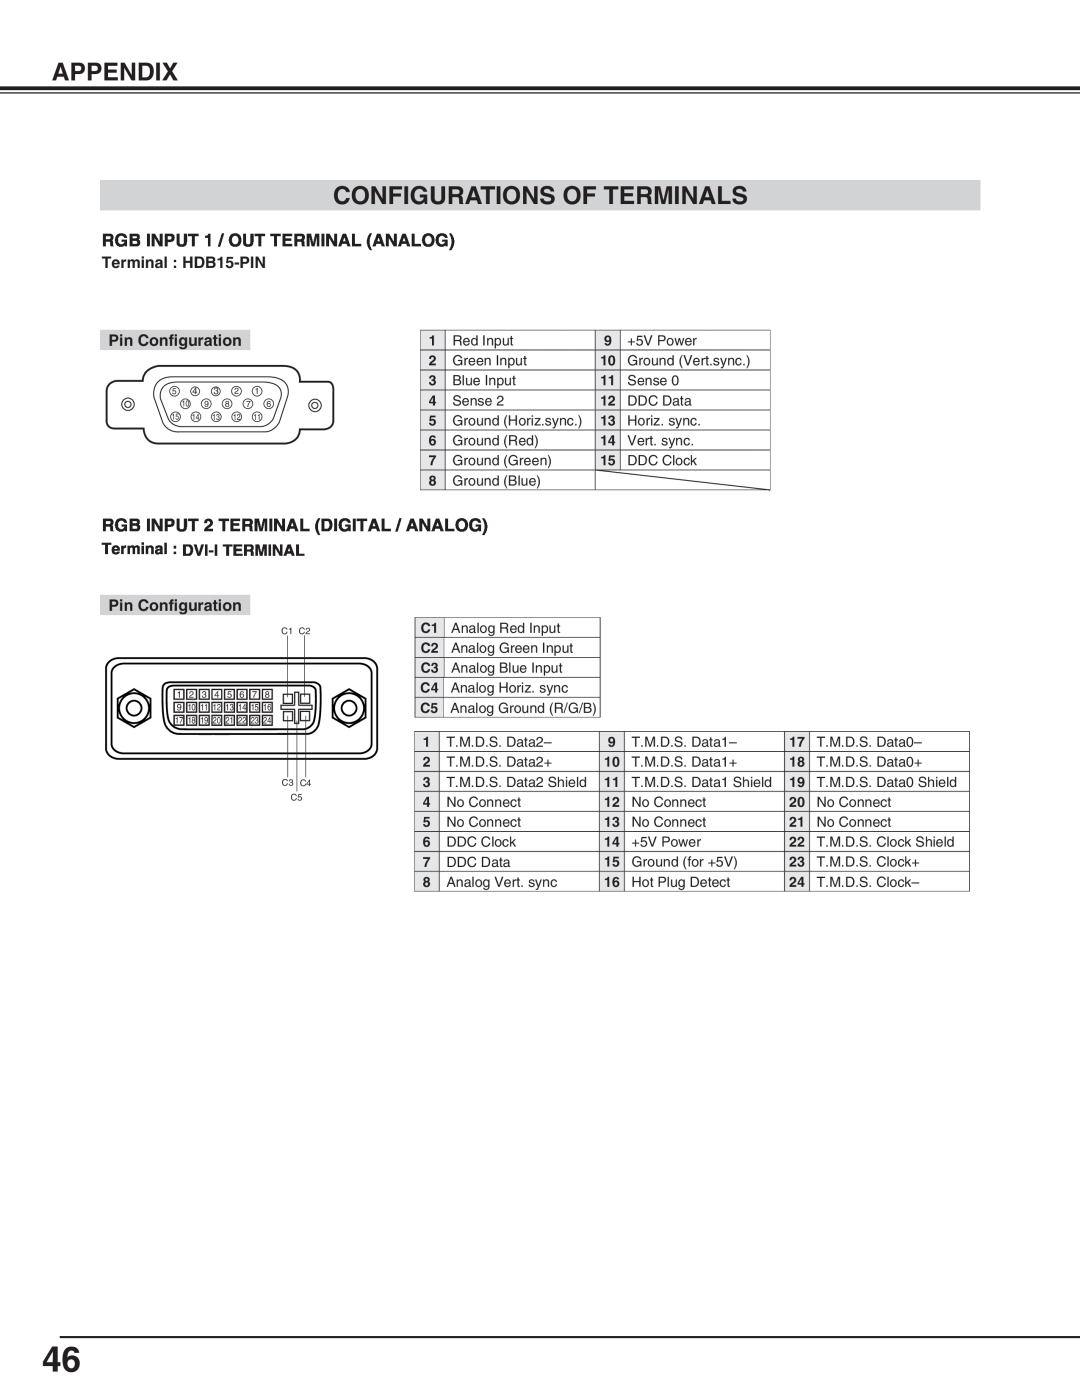 Canon LV-5200 owner manual Appendix Configurations Of Terminals, RGB INPUT 1 / OUT TERMINAL ANALOG, Terminal HDB15-PIN 